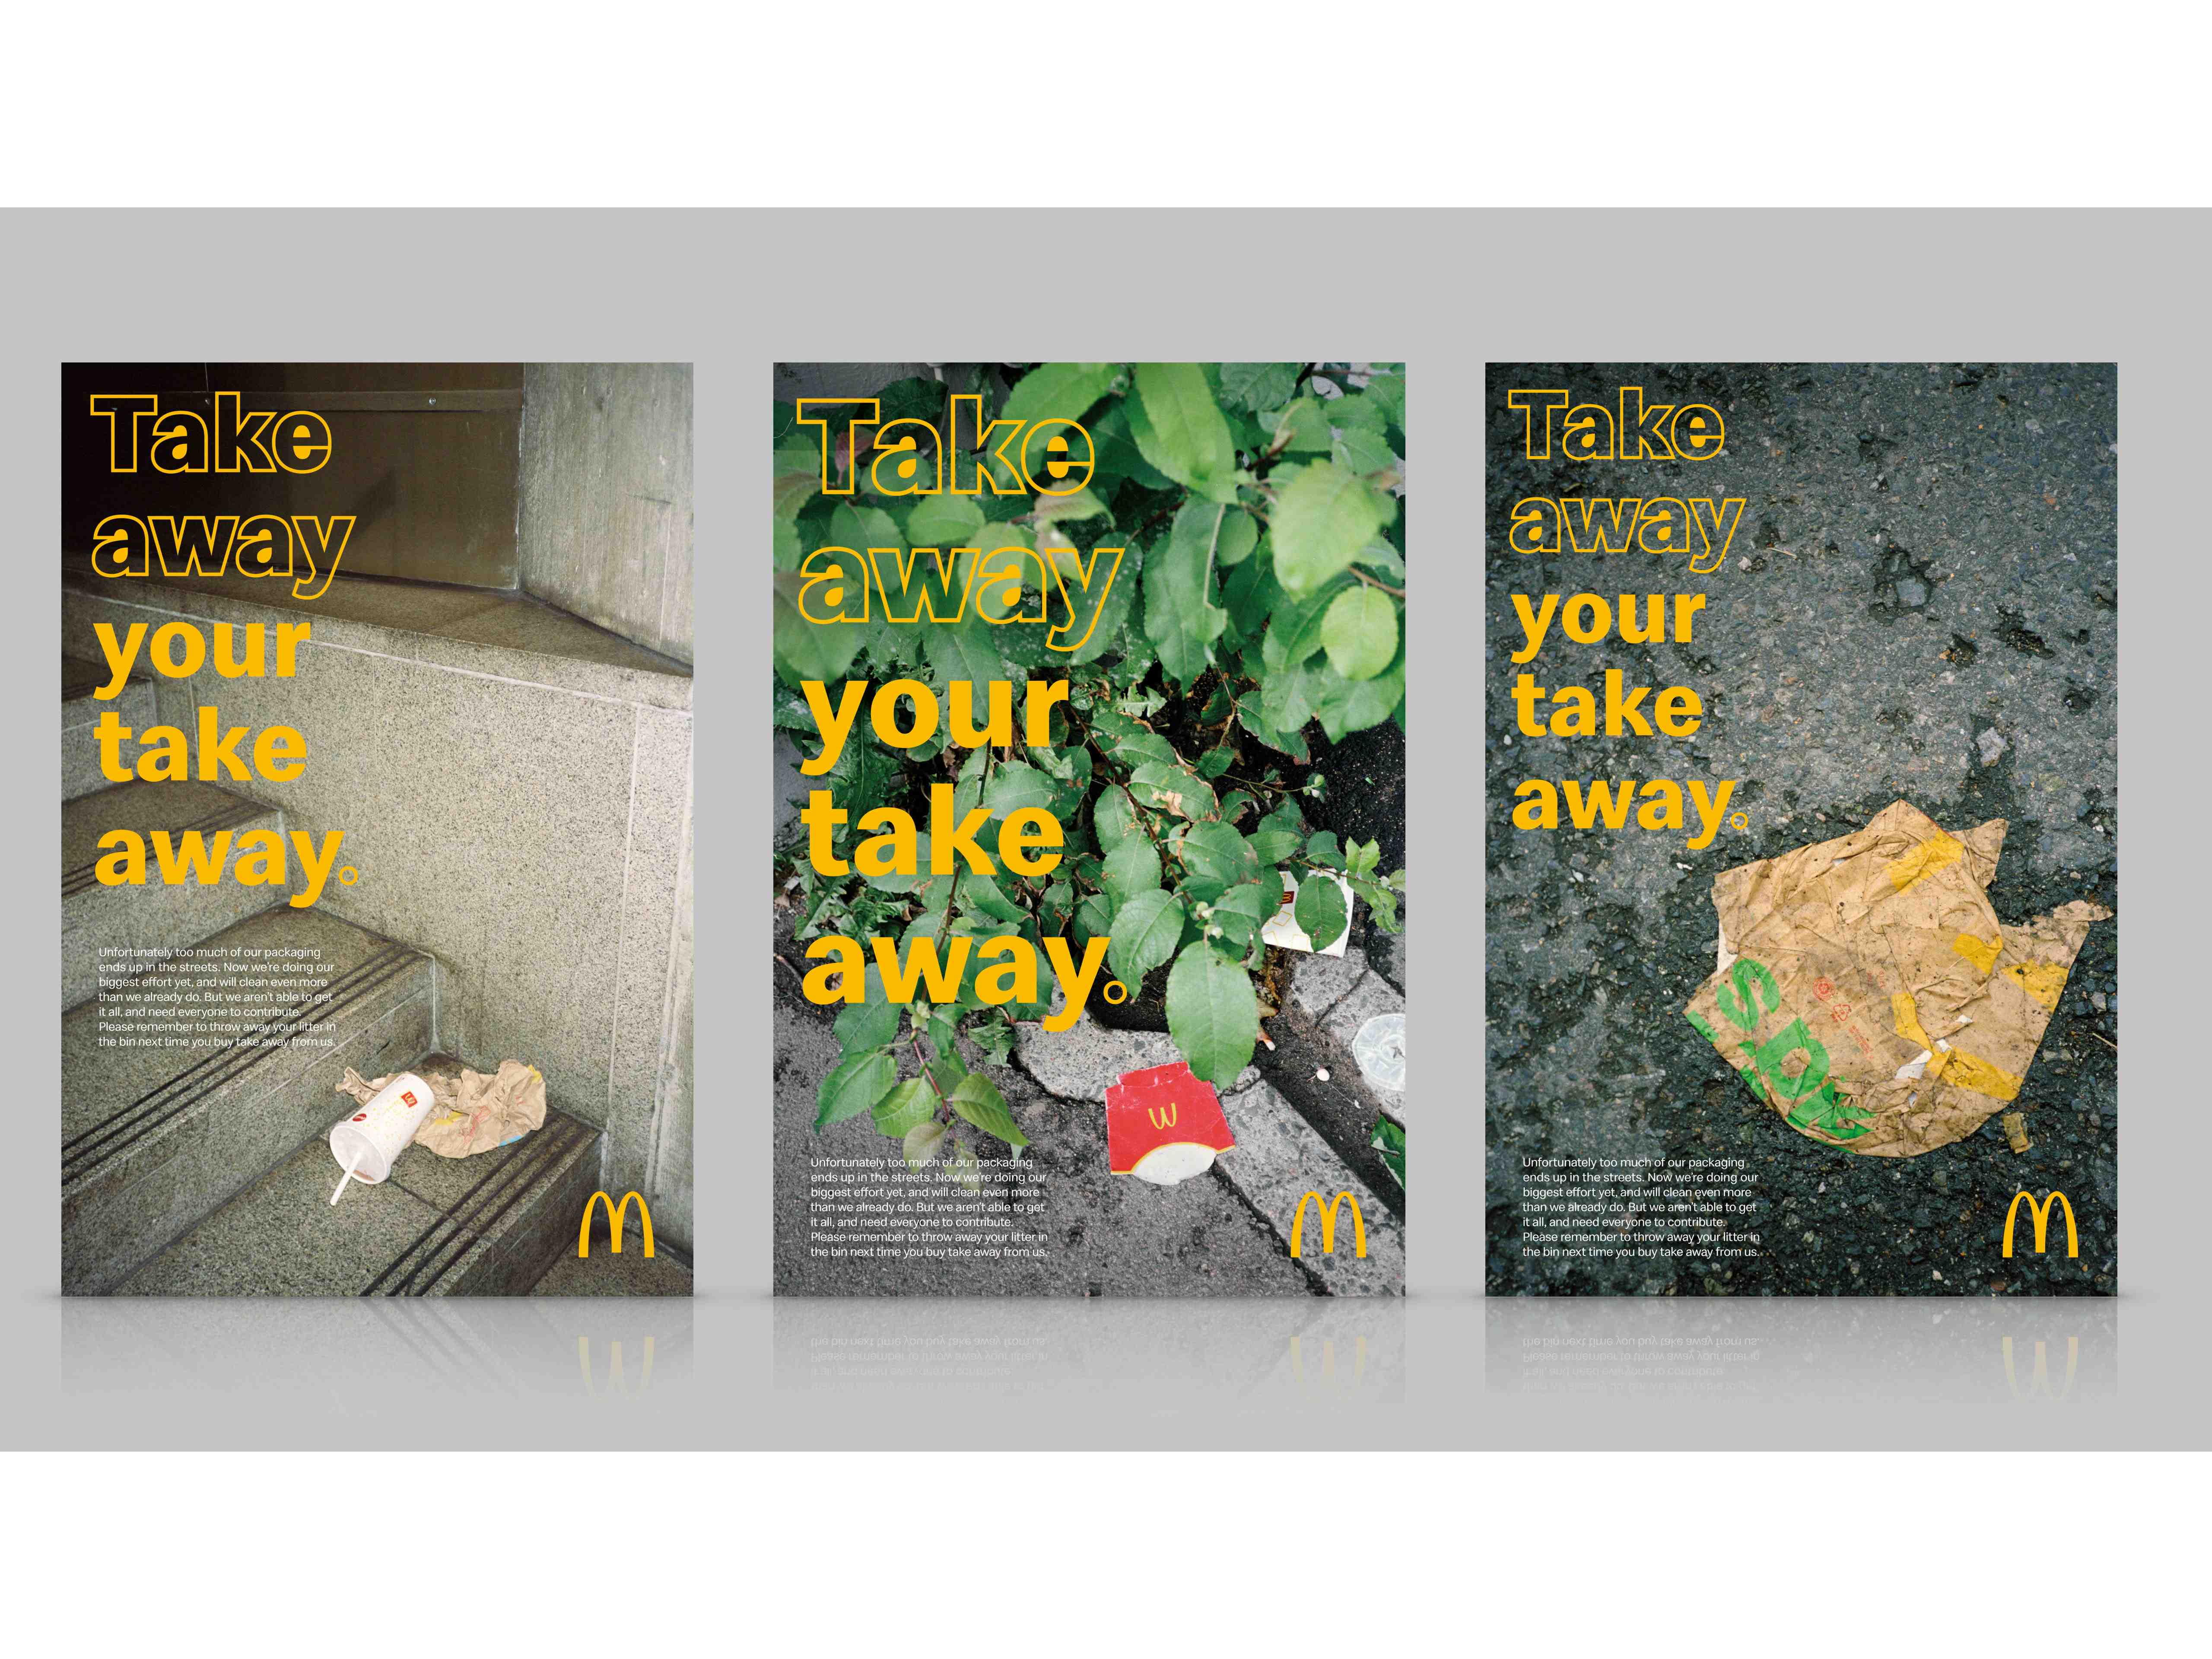 McDonald’s Norway shows its ugly side in a new anti-littering campaign